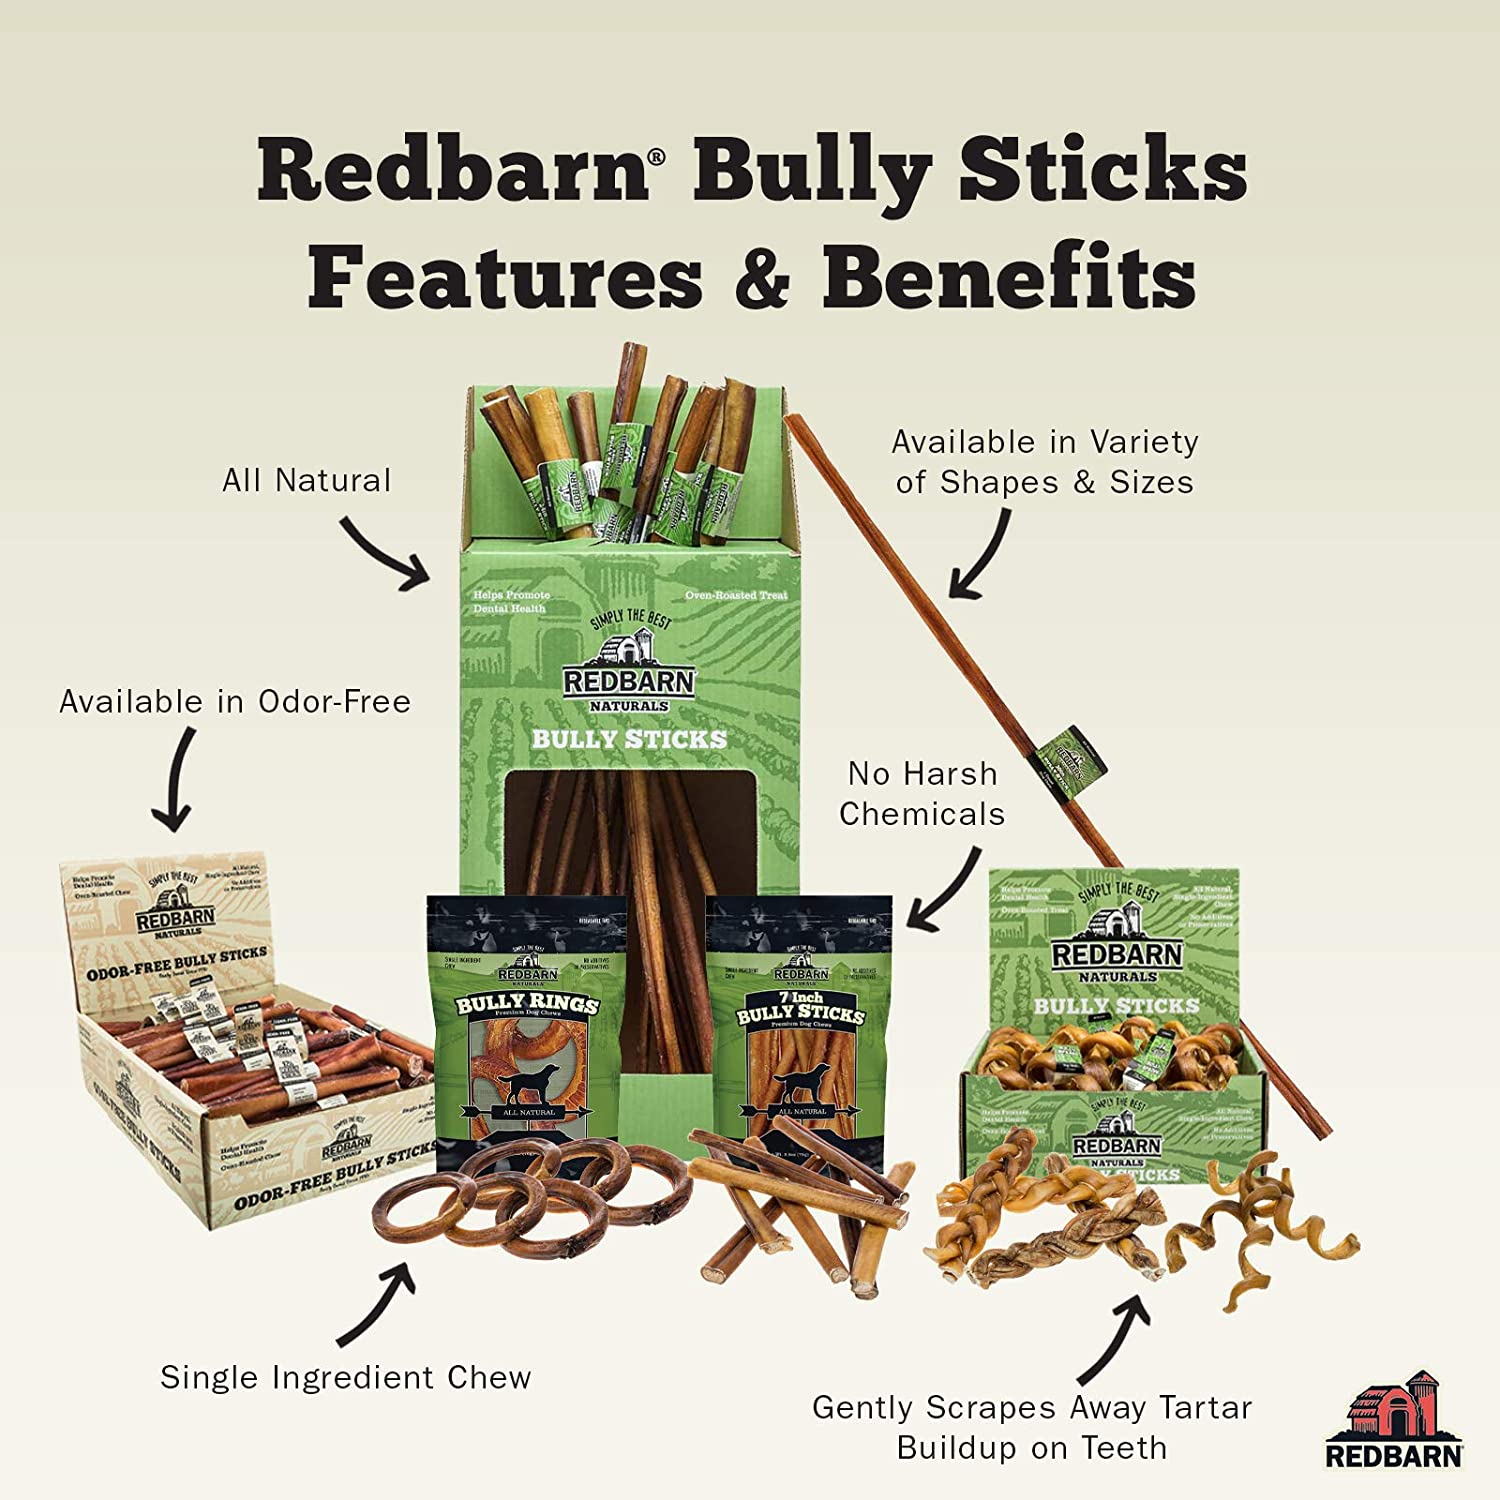 Red Barn 3-4 inch and Bully Stick